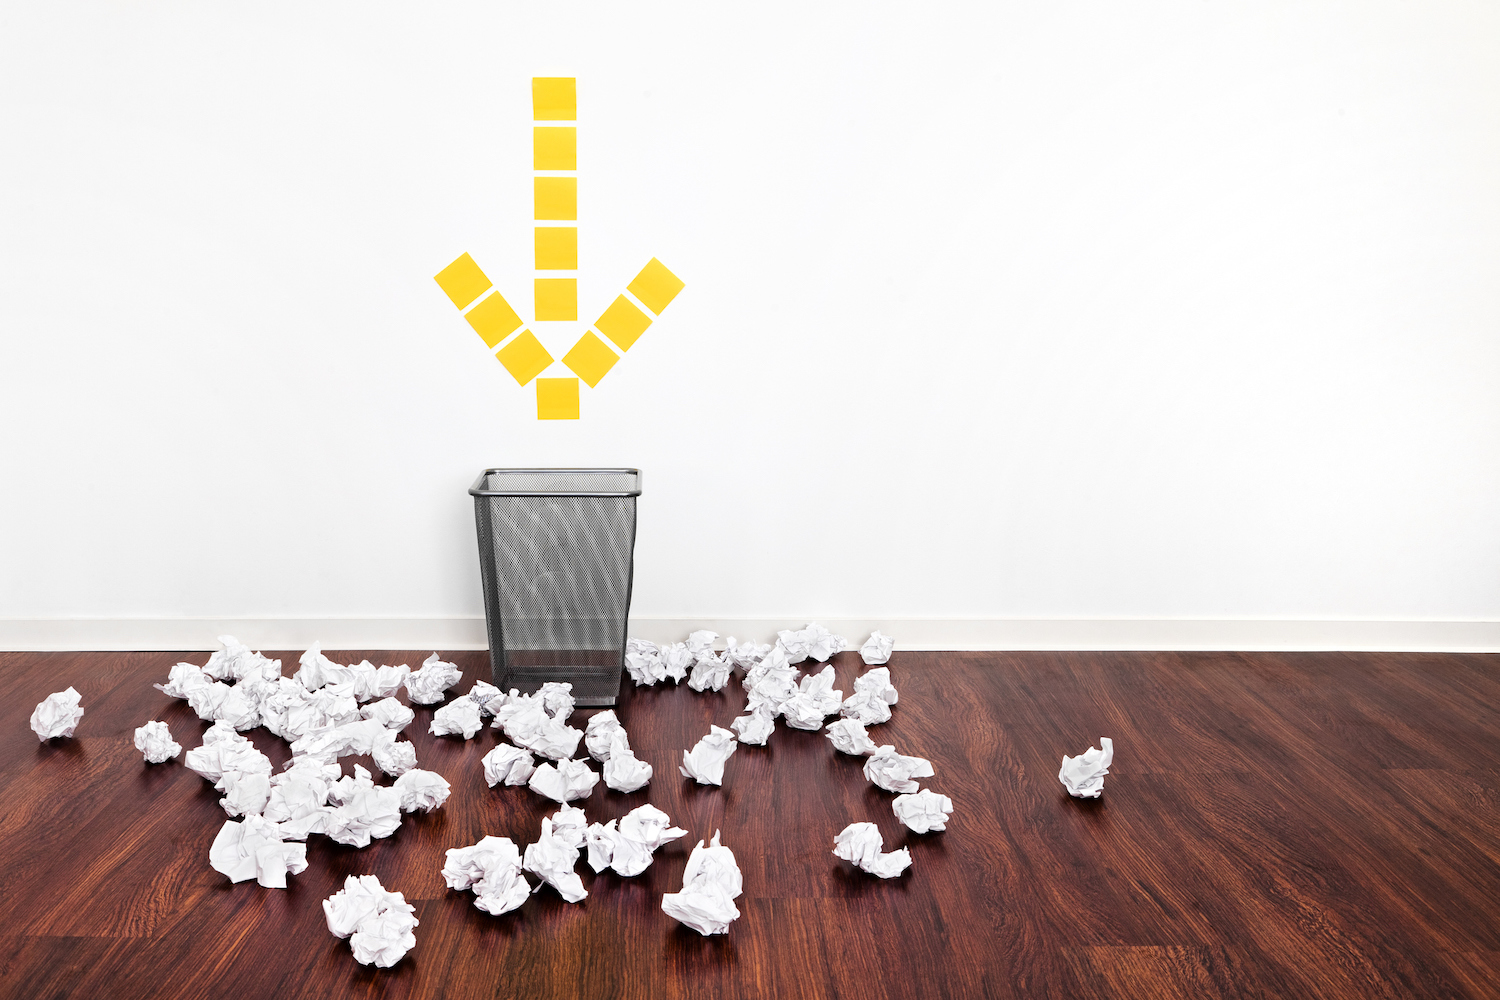 "Failure" Office Metaphor a trash can with a yellow arrow pointing at it surrounded by crumpled paper balls.